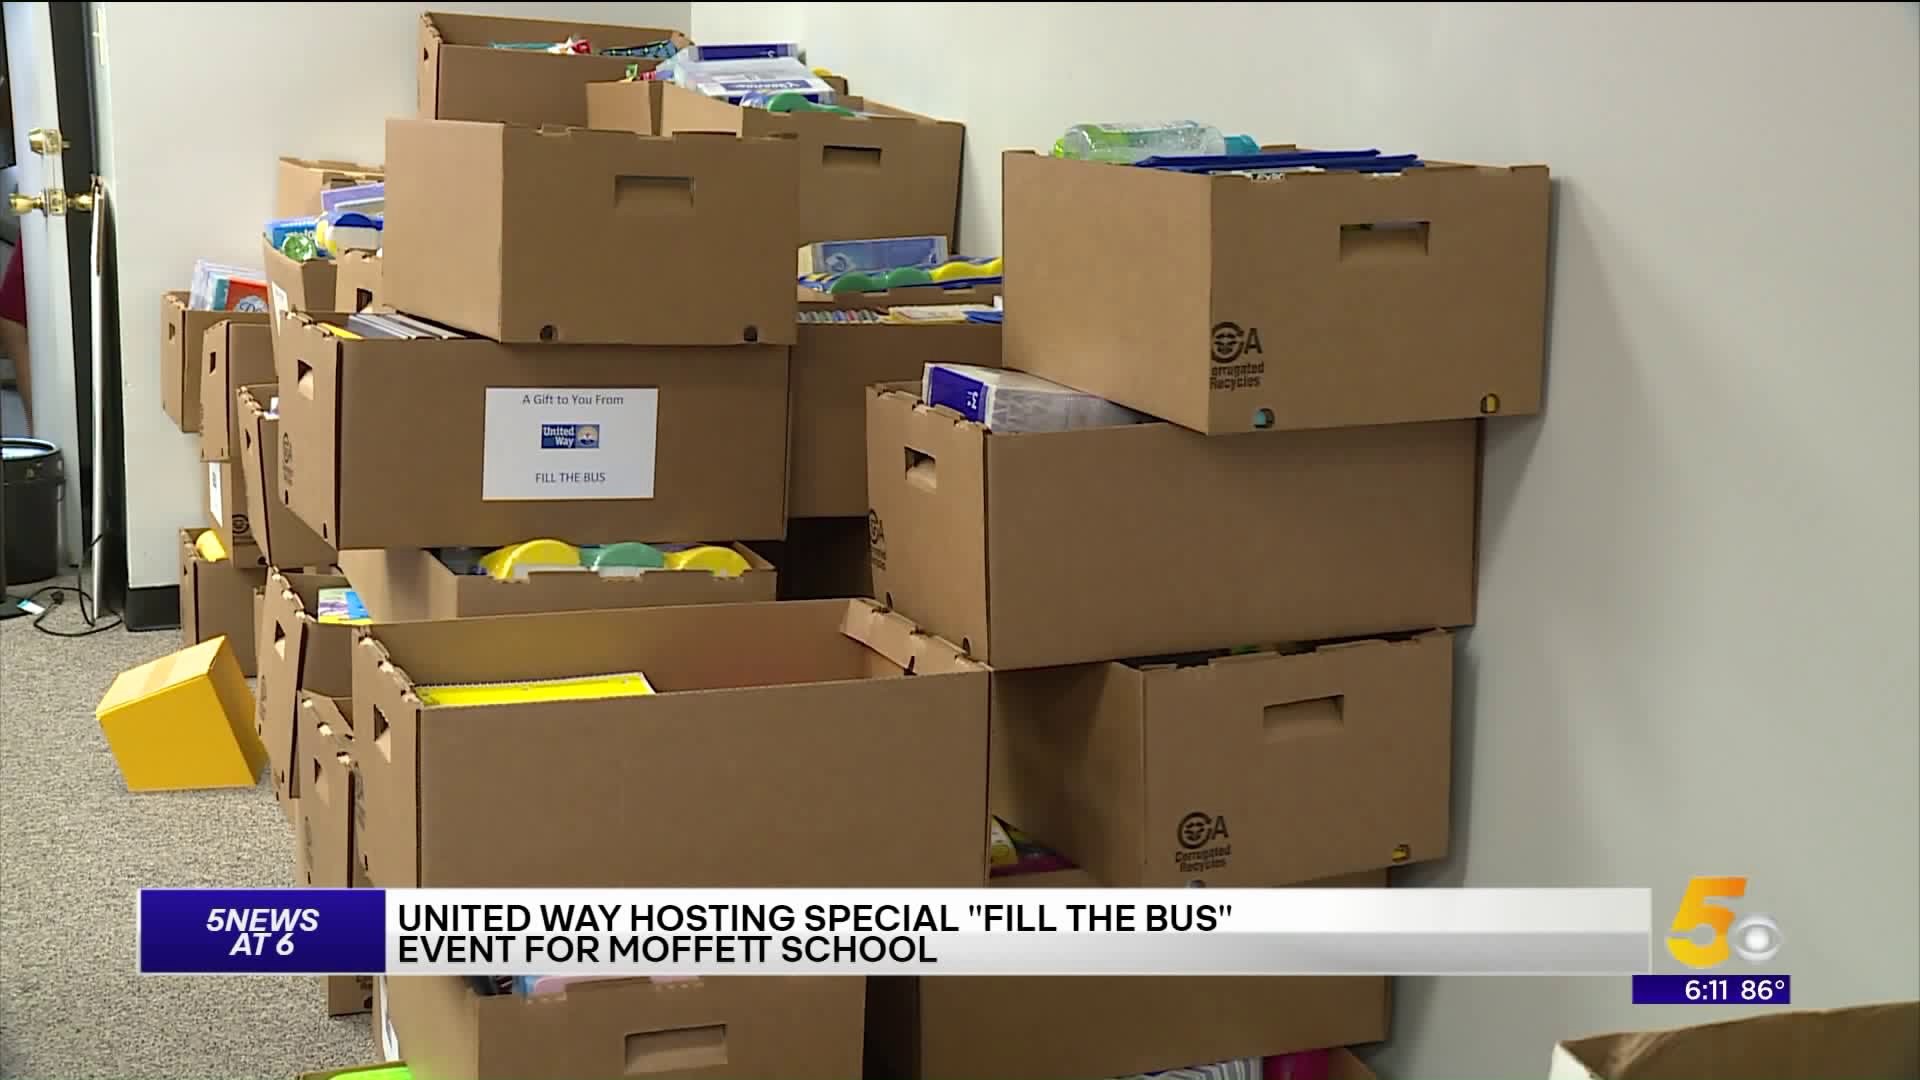 United Way Hosting Special Fill the Bus